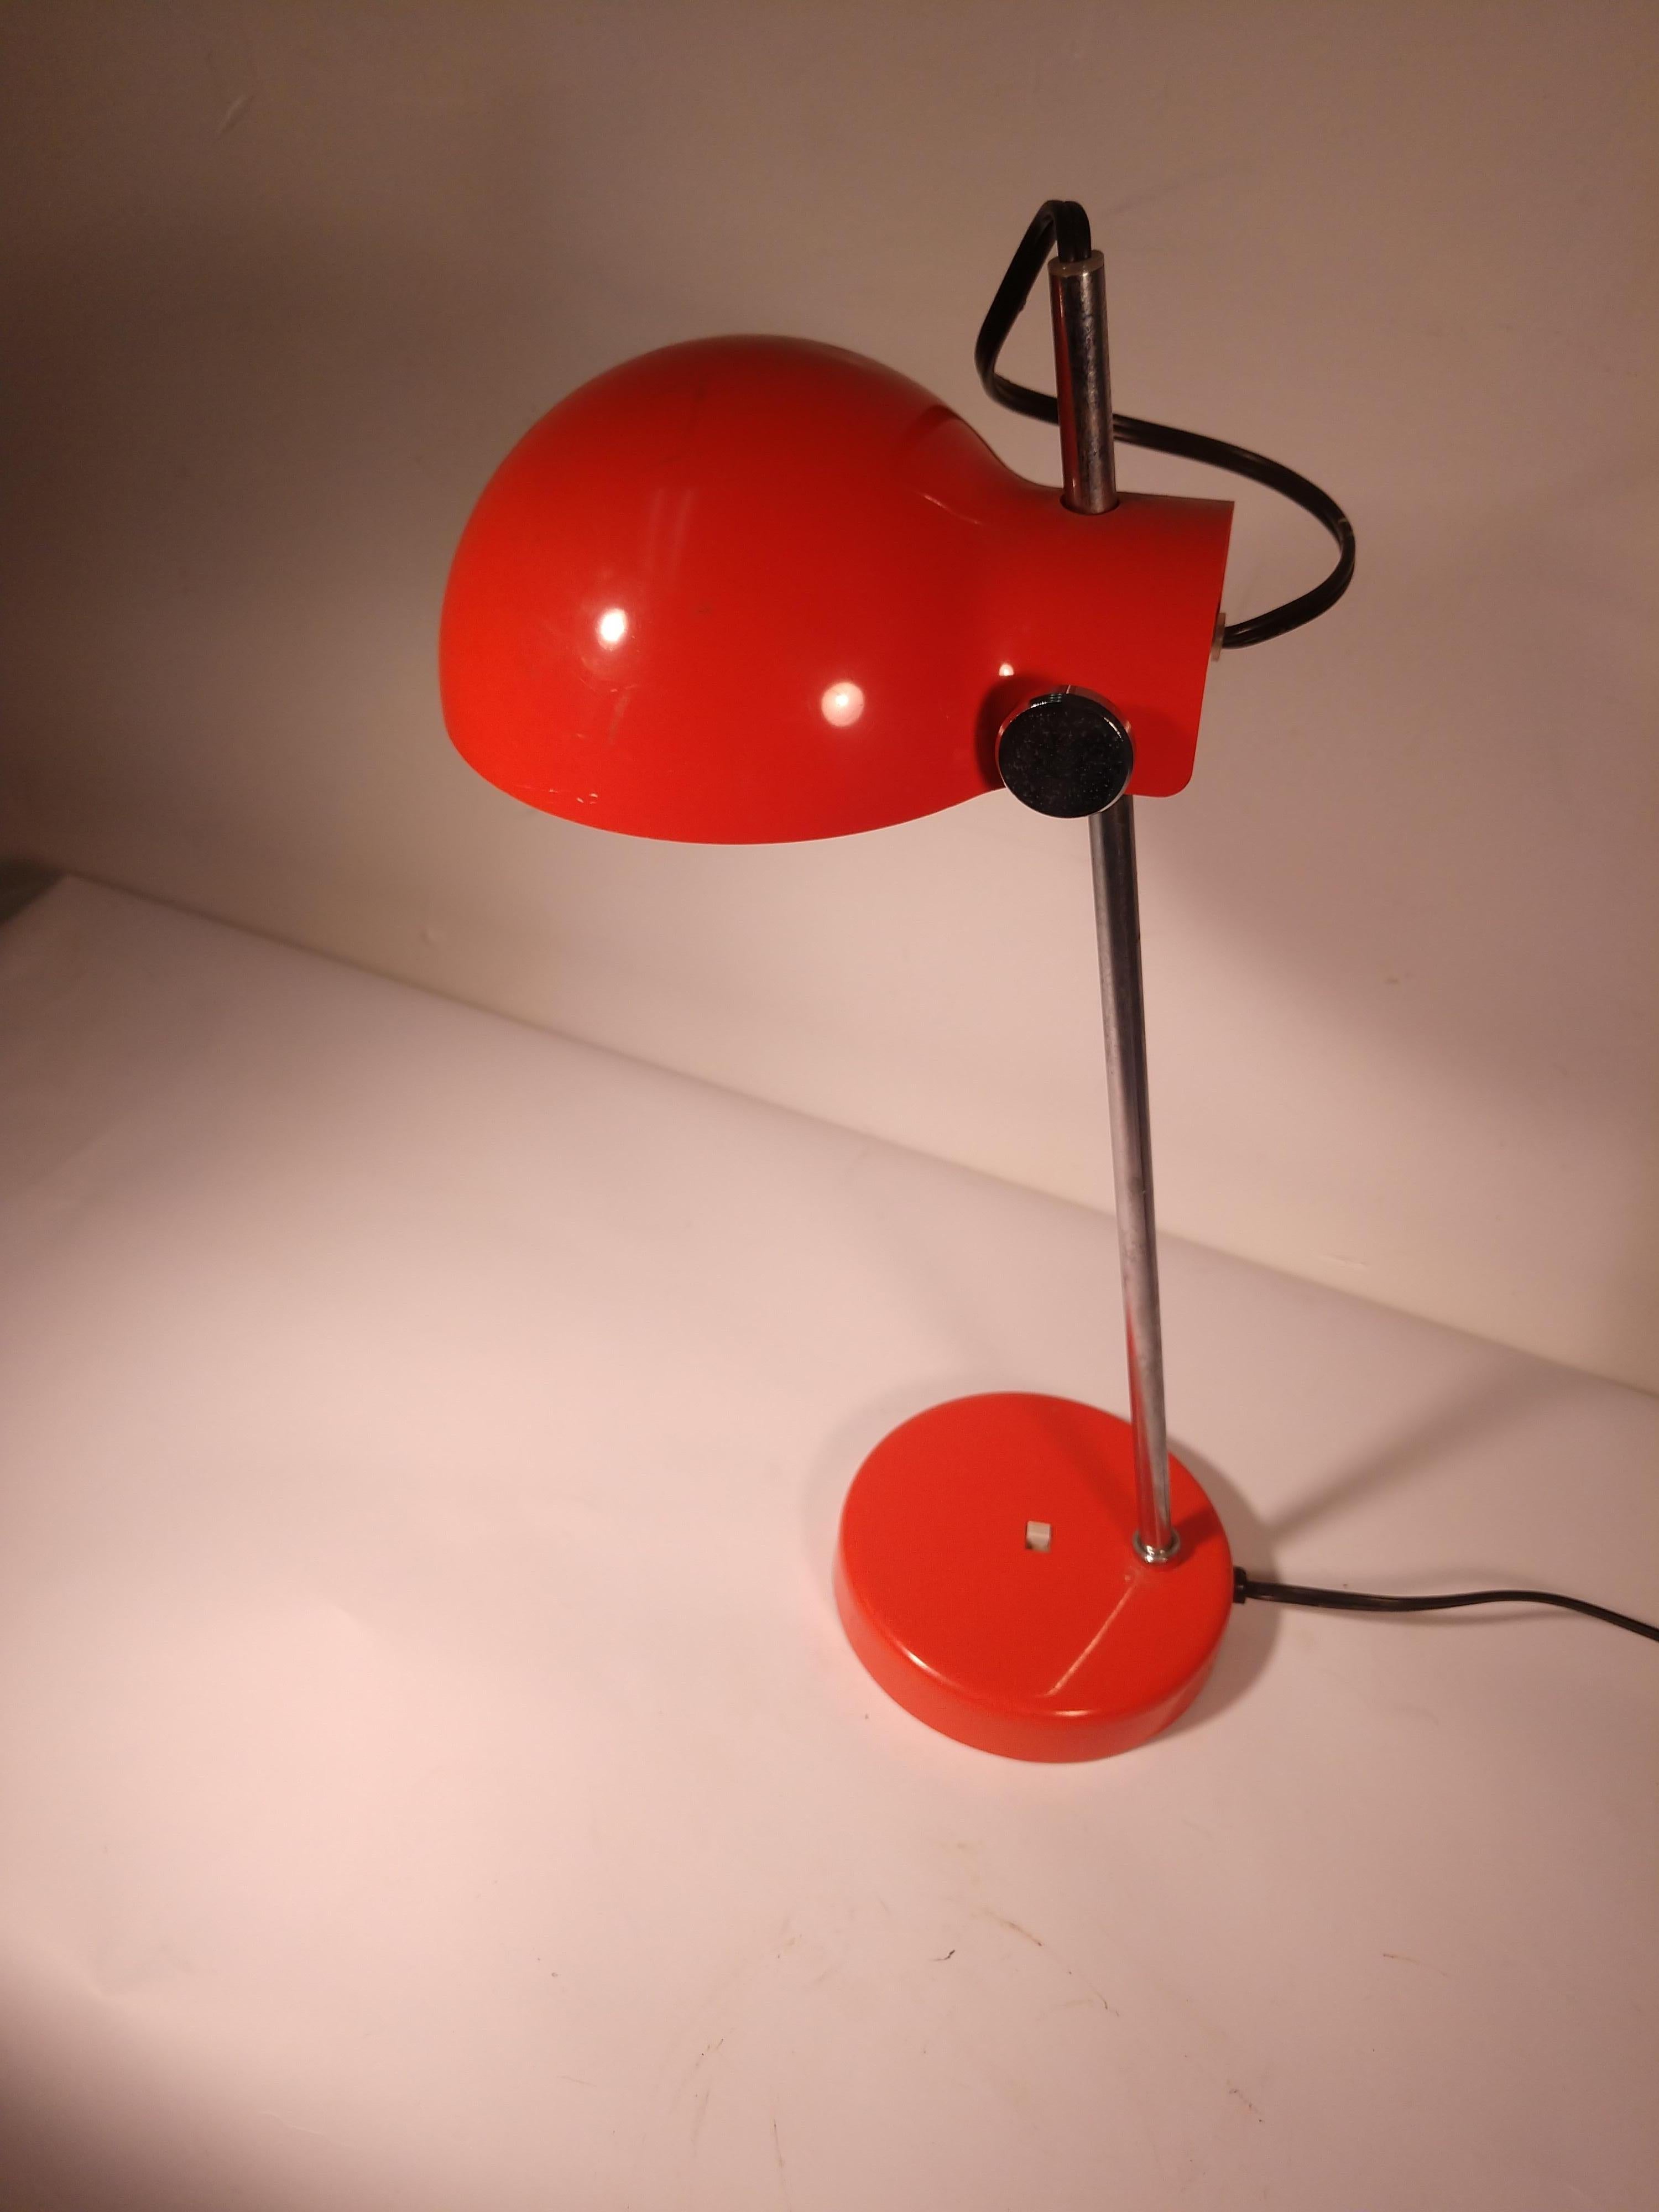 Fabulous Lightolier adjustable desk lamp in orange red.
Plastic with a chrome shaft which the shade can be adjusted, chrome locking thumbscrew.